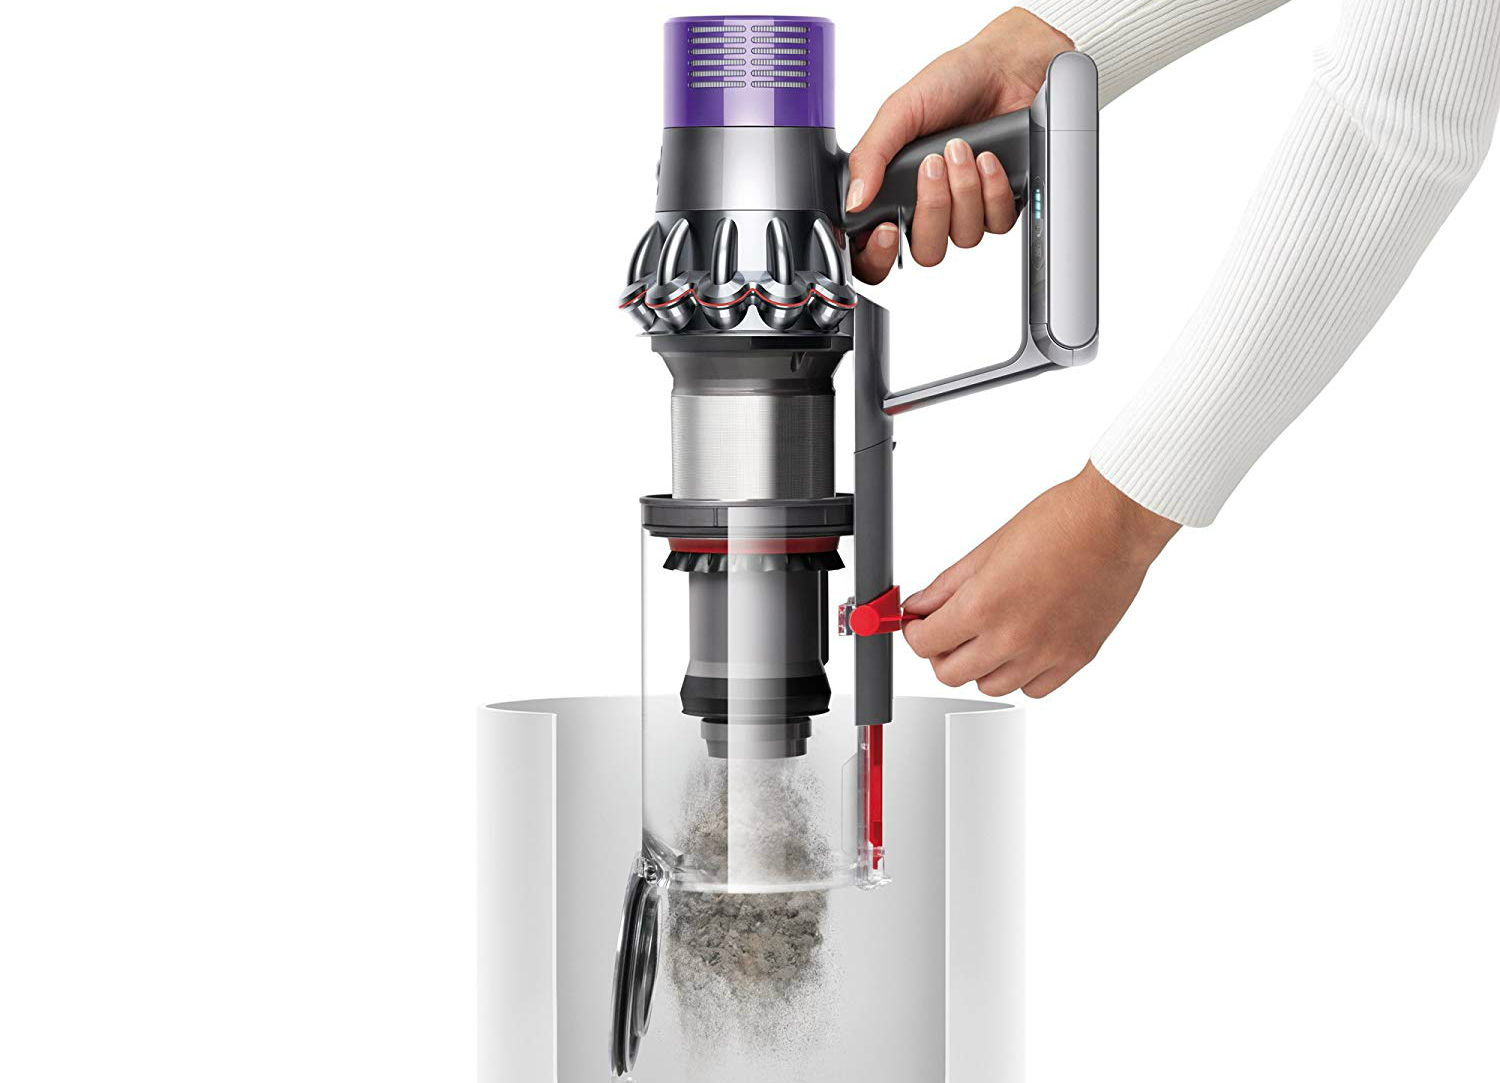 The Dyson V10 point-and-shoot dustbin.